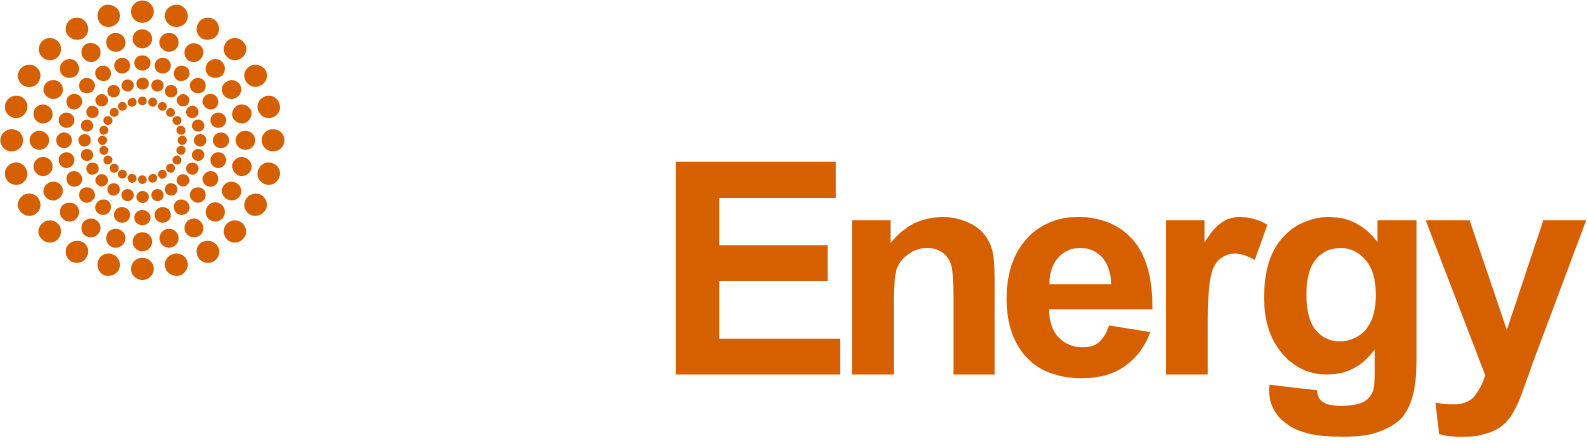 IsoEnergy logo large for dark backgrounds (transparent PNG)